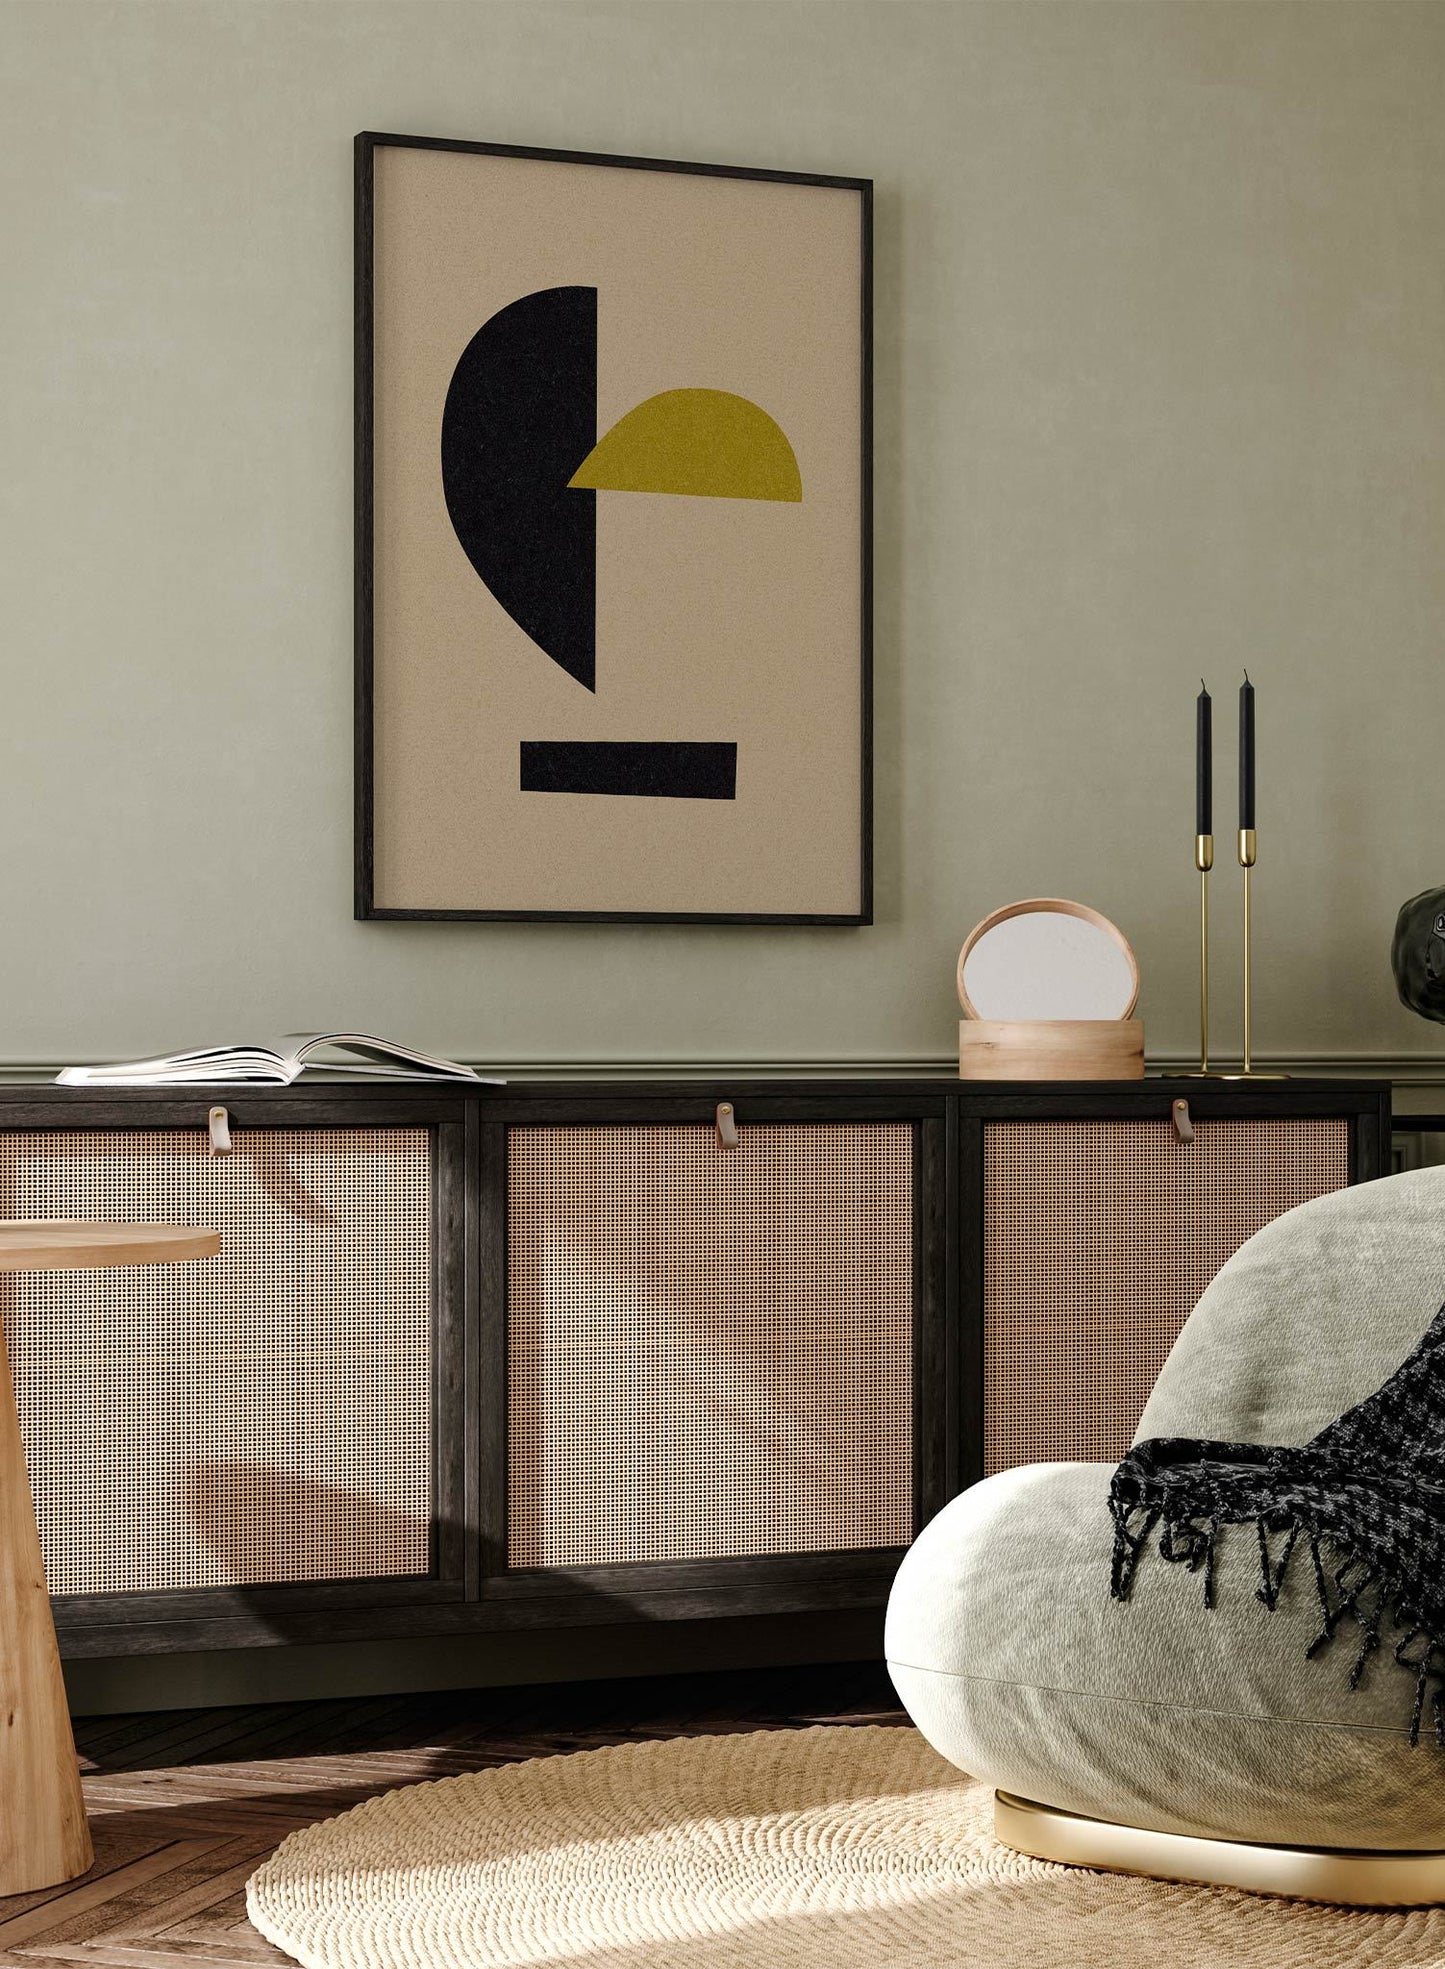 Fragments is a minimalist abstract illustration of two semicircles and a rectangle at the bottom by Opposite Wall.